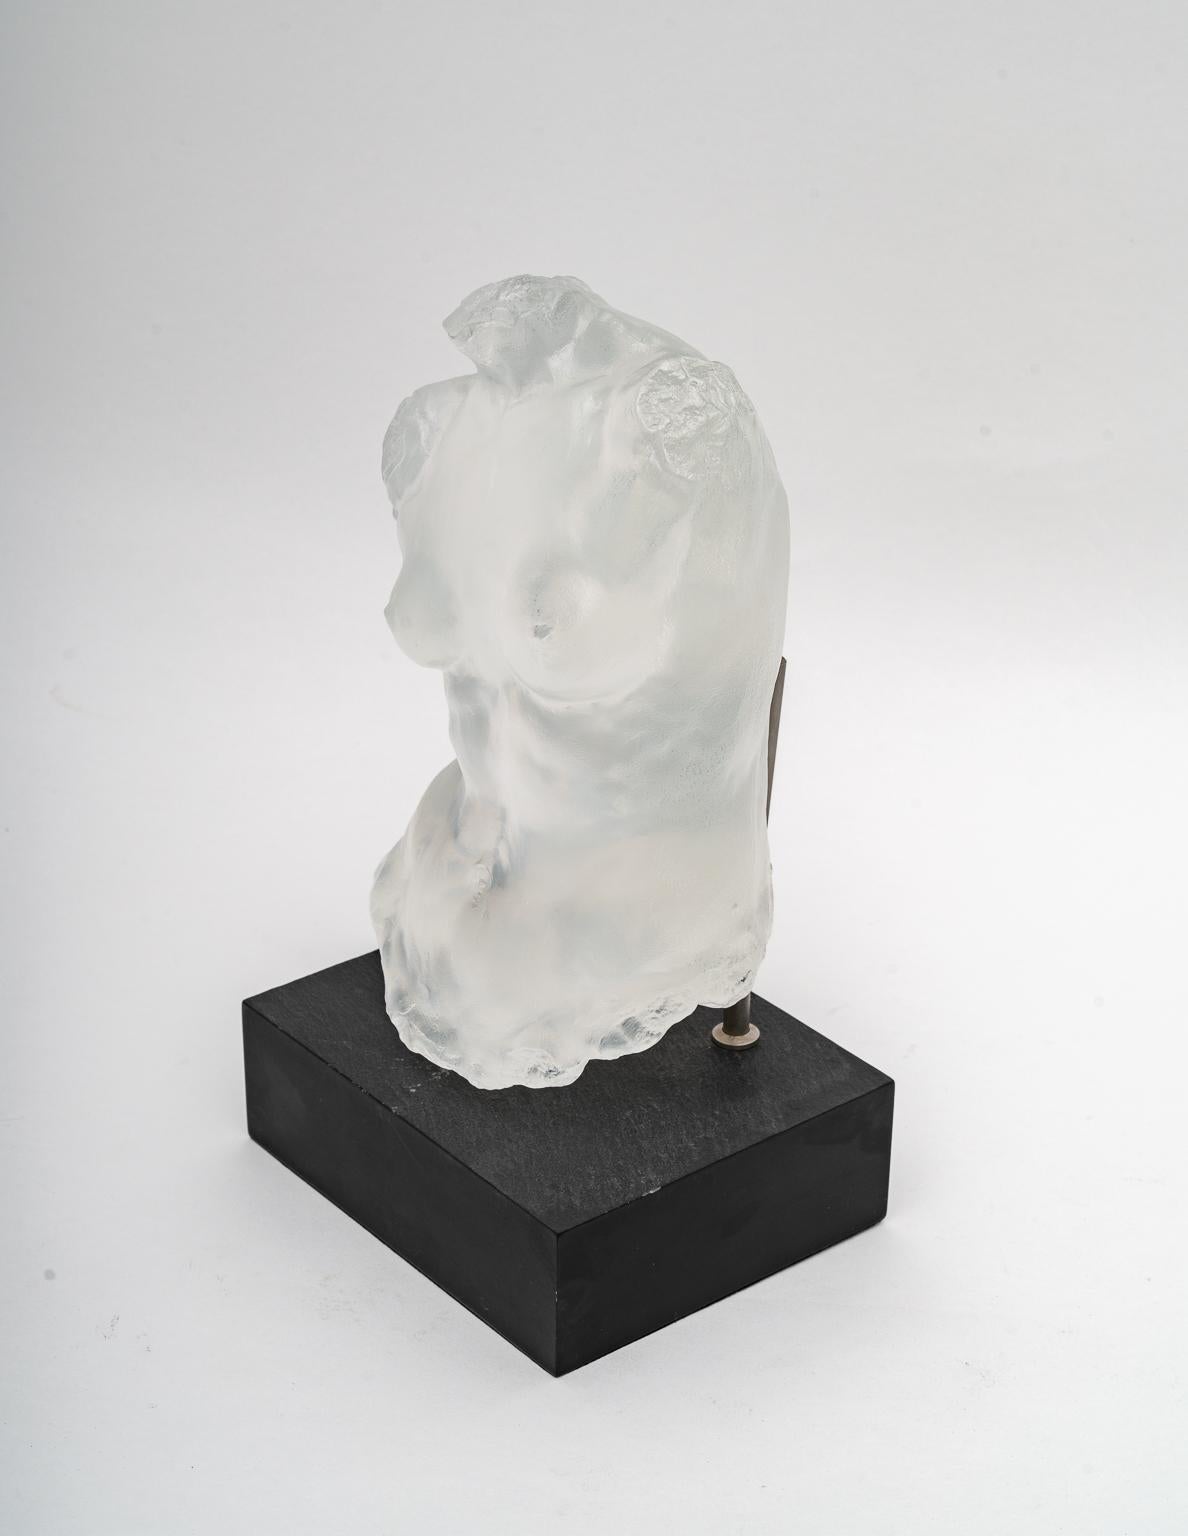 This stylish and chic sculpture of Aphrodite was acquired from a Palm Beach estate and it was created by Gary Weisman for Steuben glass and dates to the late 20th century.